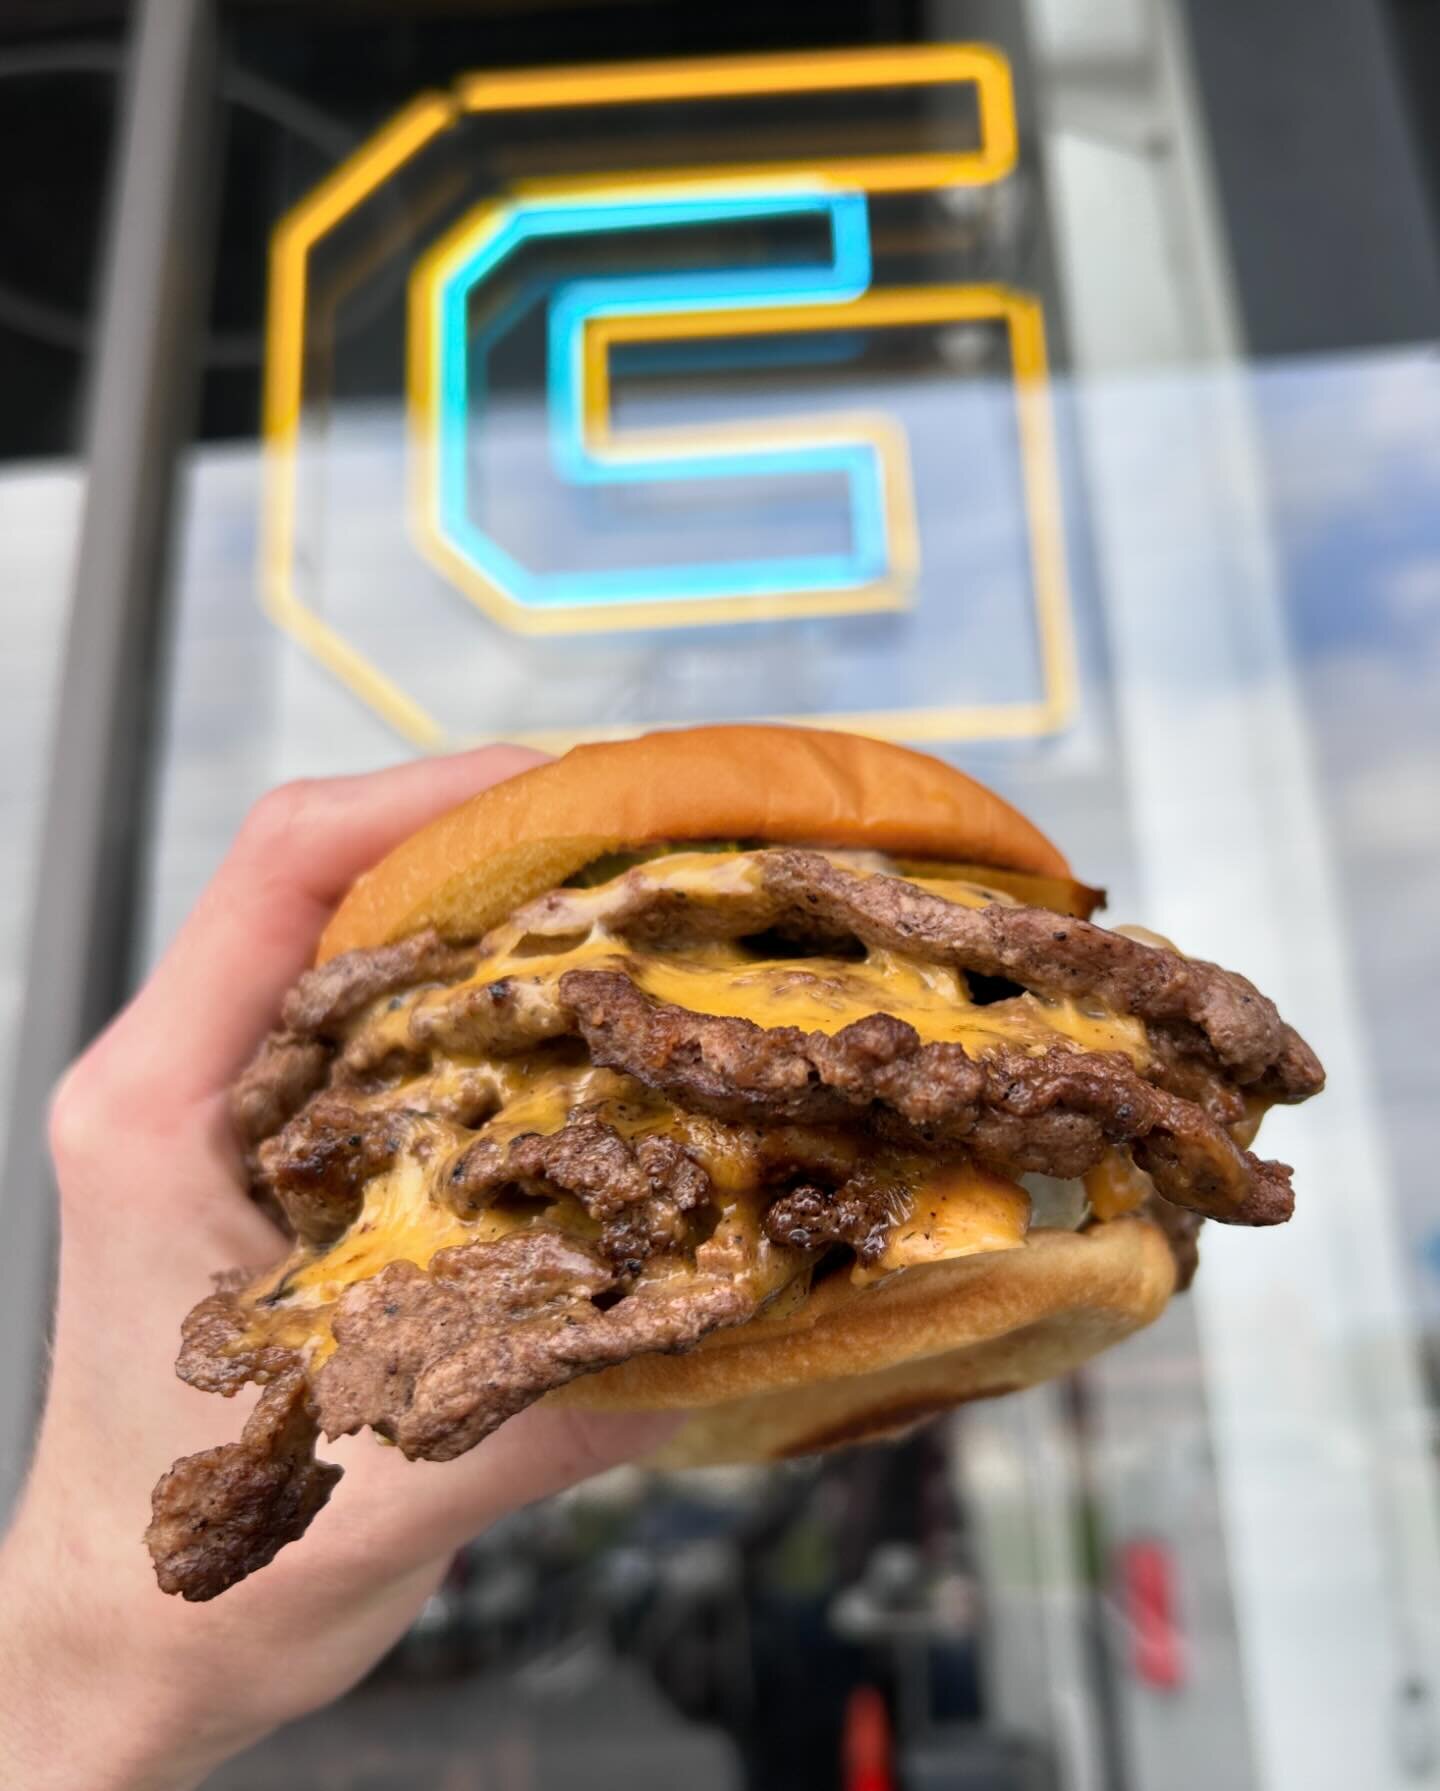 🍔 SMASH your hunger with our upgraded Super Smash Burgers!
New combos unlocked: 1v1, 2v2, 3v3, or 4v4

Crispy-edged all beef burger patties
Melted American Cheese
Housemade Bot Sauce
Fresh veg and tangy pickles (if you&rsquo;re into that)
Served on 